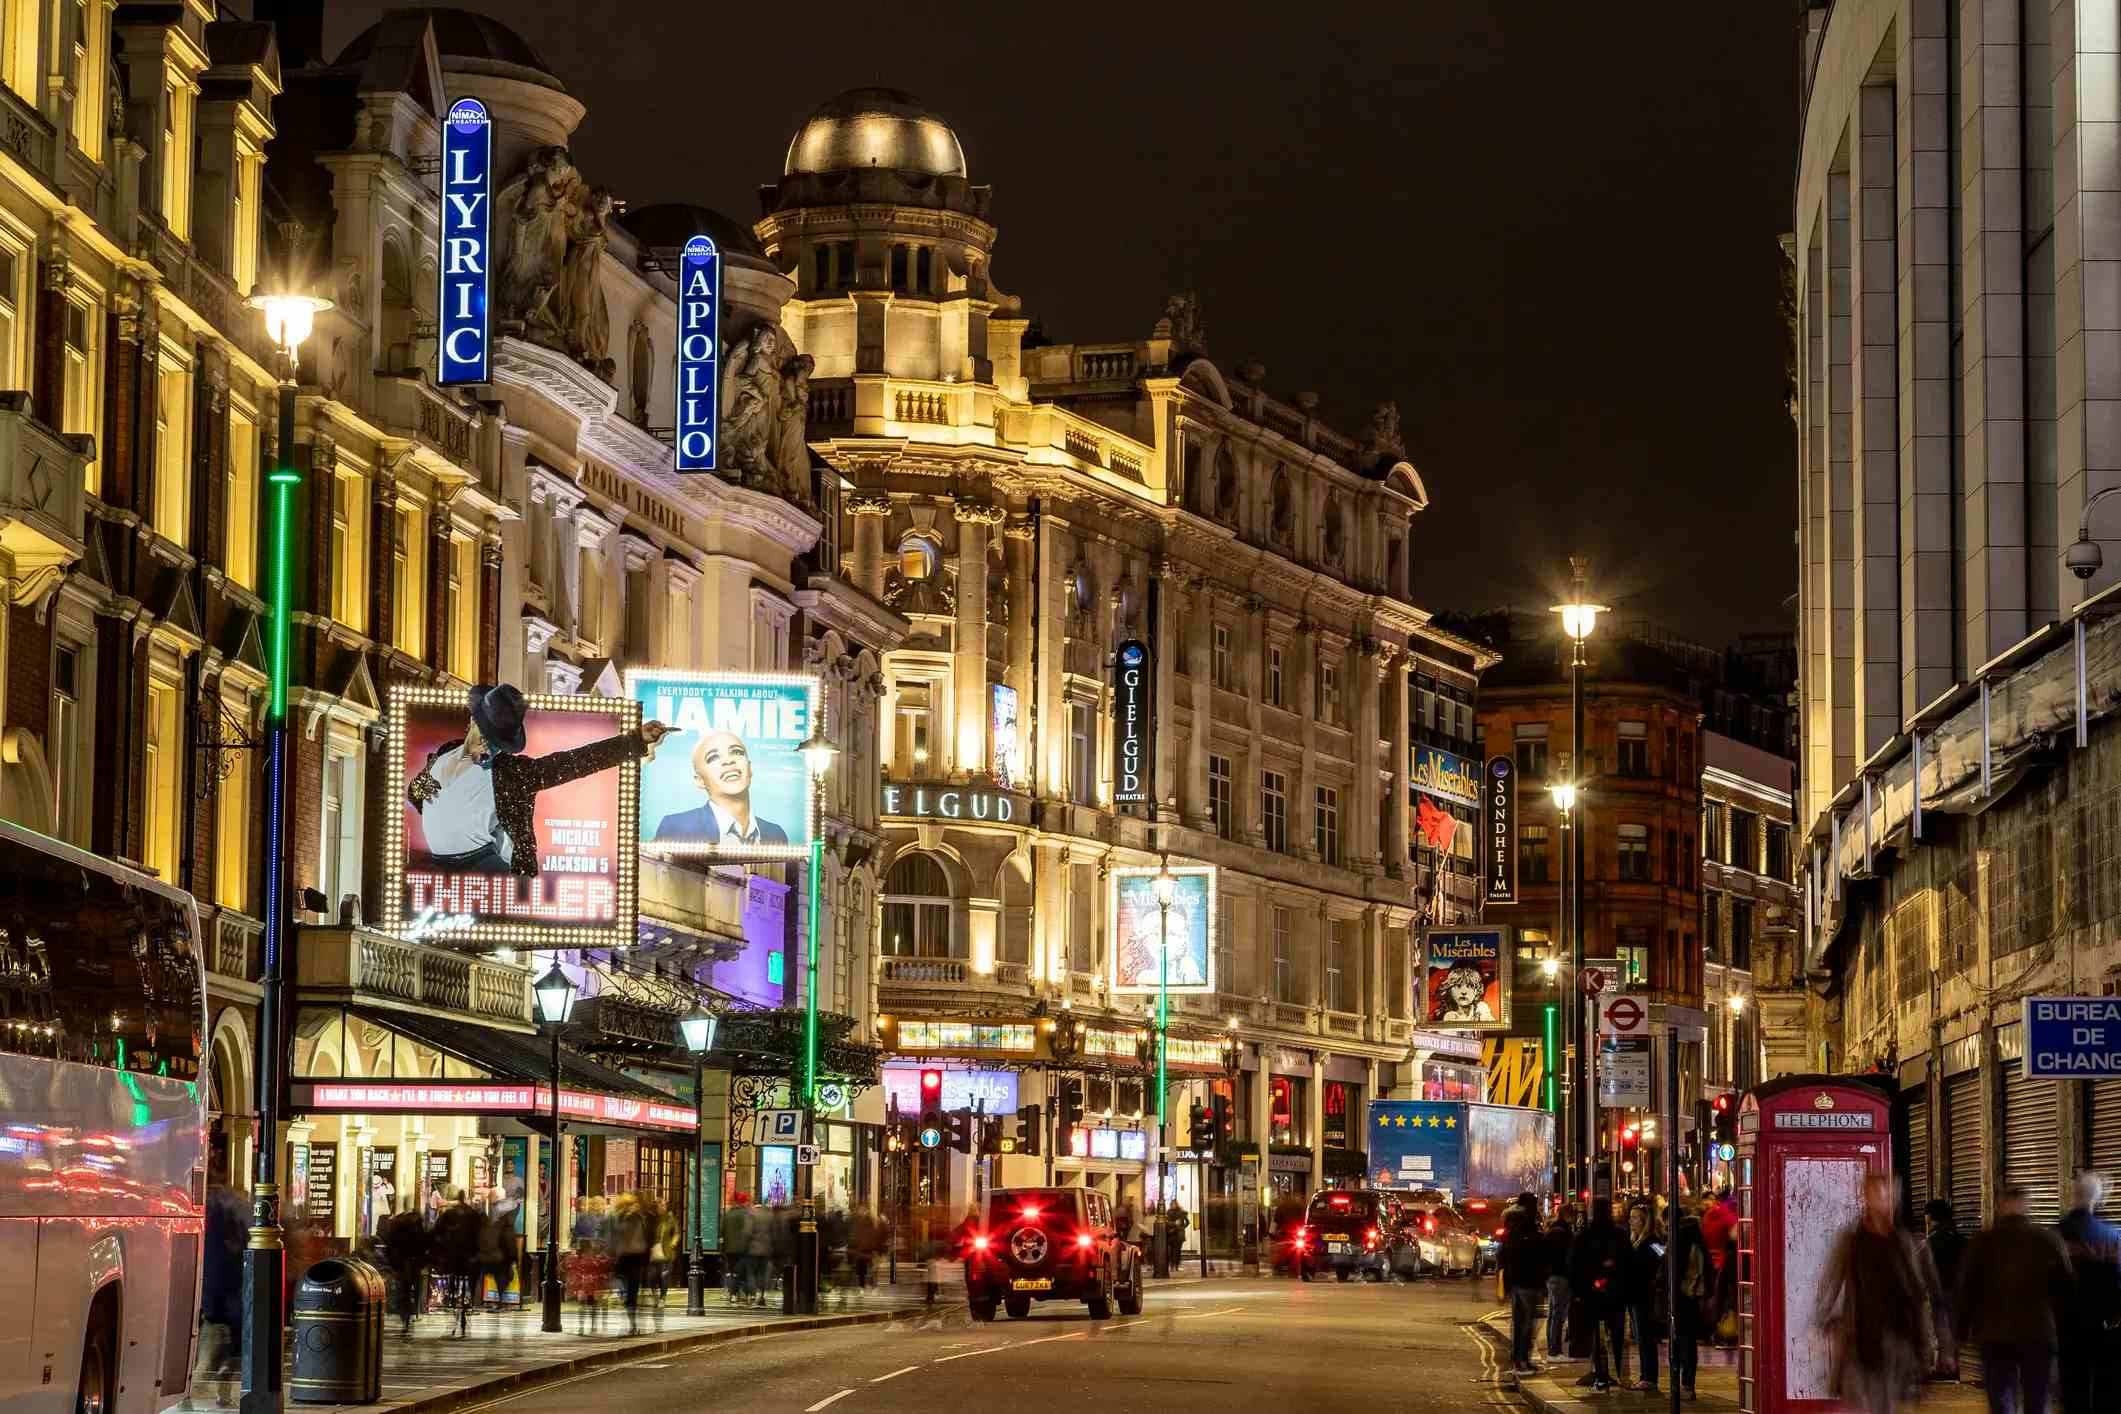 How To Swiftly Experience The Best Of The London's West End: A Half-Day Adventure image